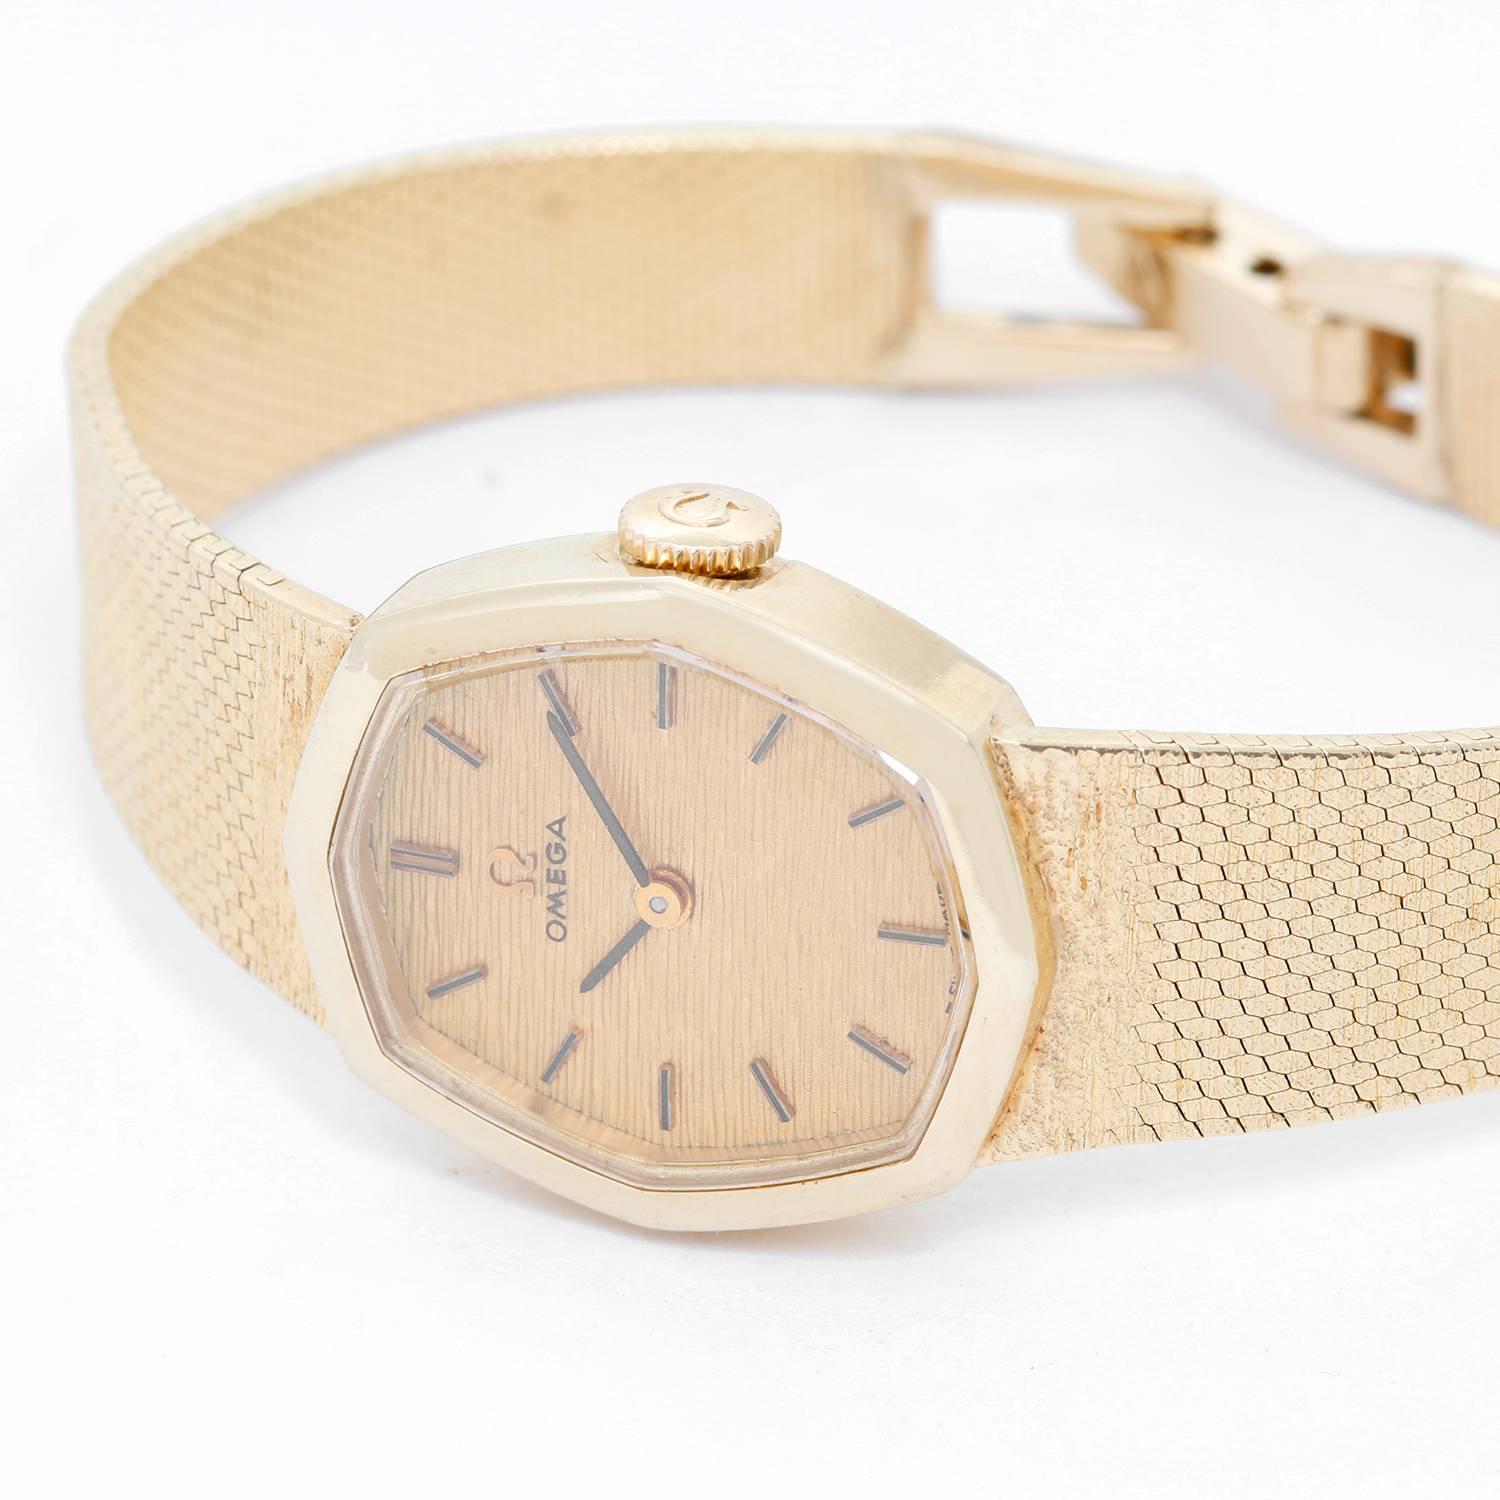 Vintage Omega 14K Yellow Gold Ladies Watch -  Quartz. 14K Yellow Gold Octagonal shaped ( 21 mm ). Textured Champagne dial with stick hour markers. 14K Yellow Gold smooth textured mesh band with no stretch on it. Hinged clasp. Will fit a 5.5"